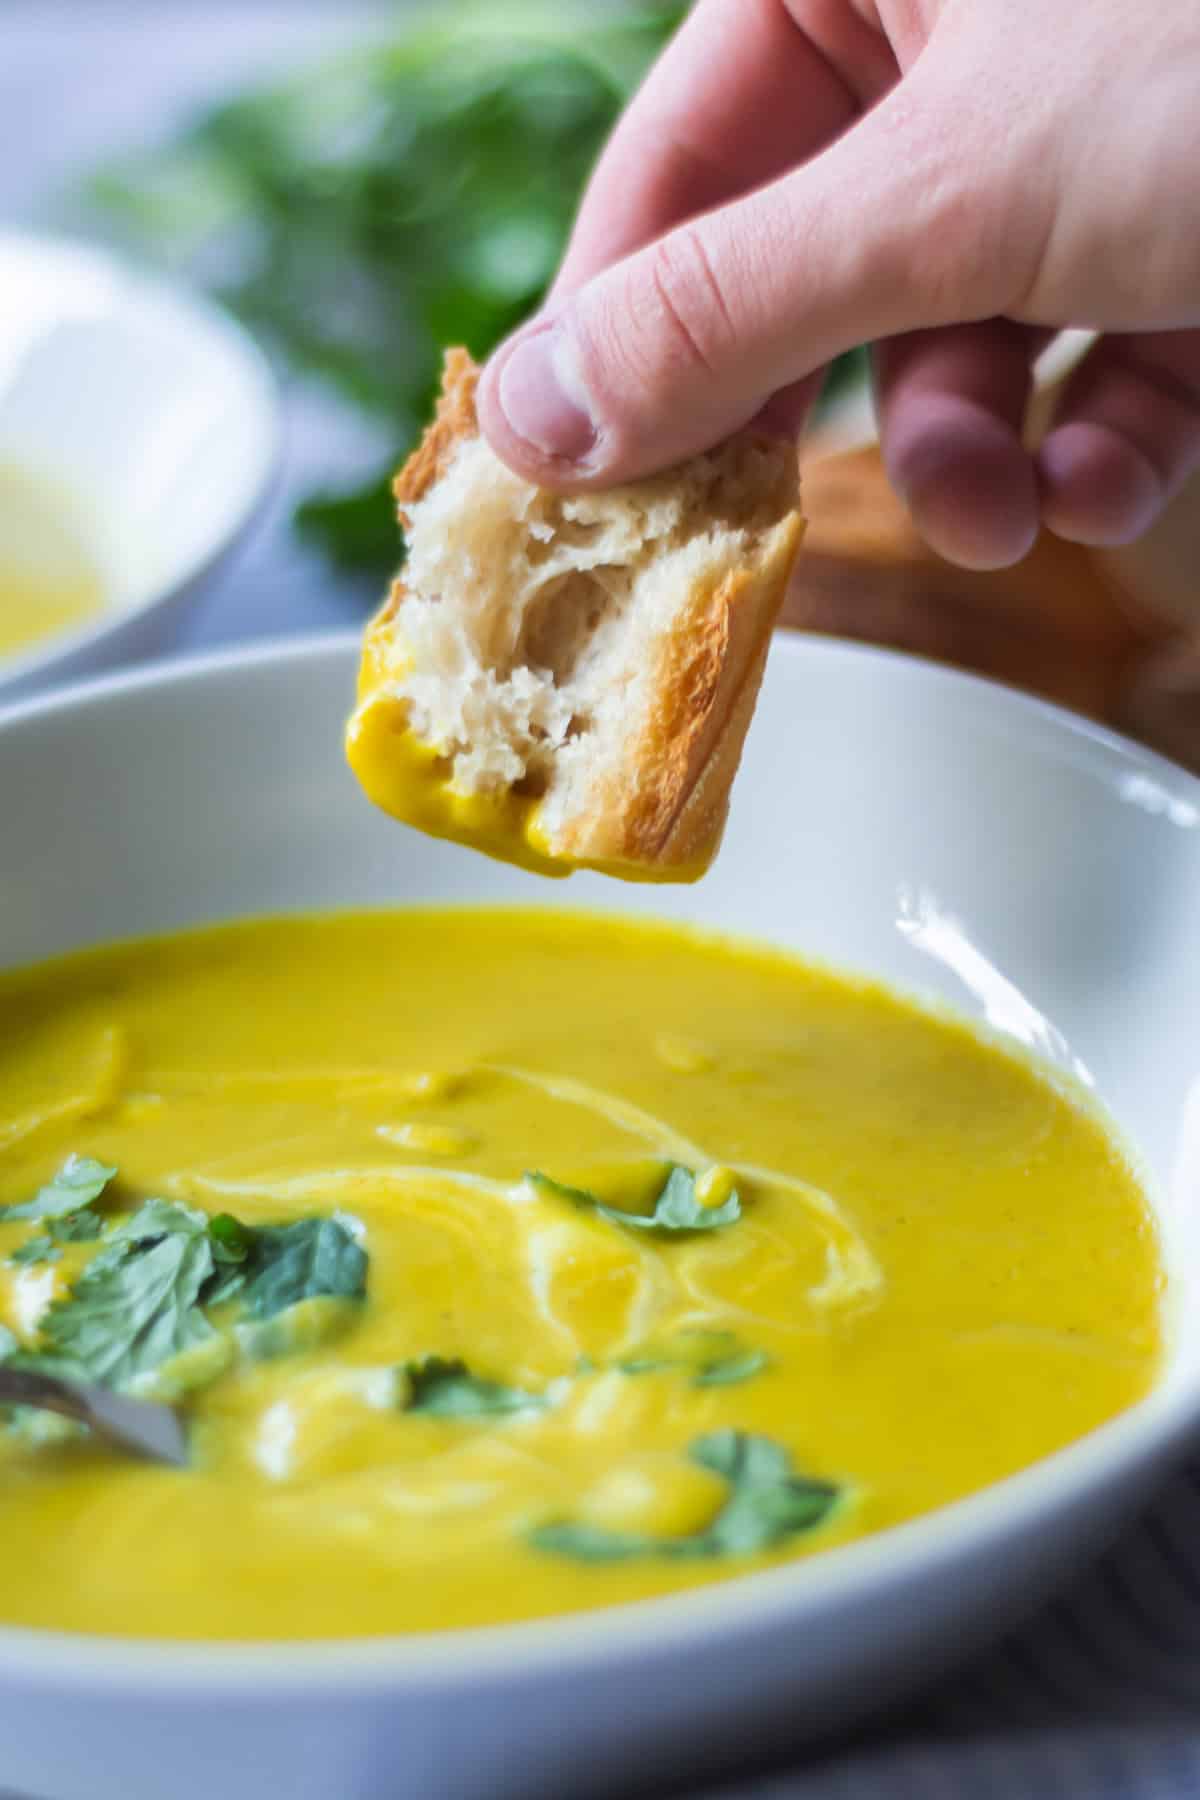 A close-up of a hand dipping a piece of bread into butternut squash soup.